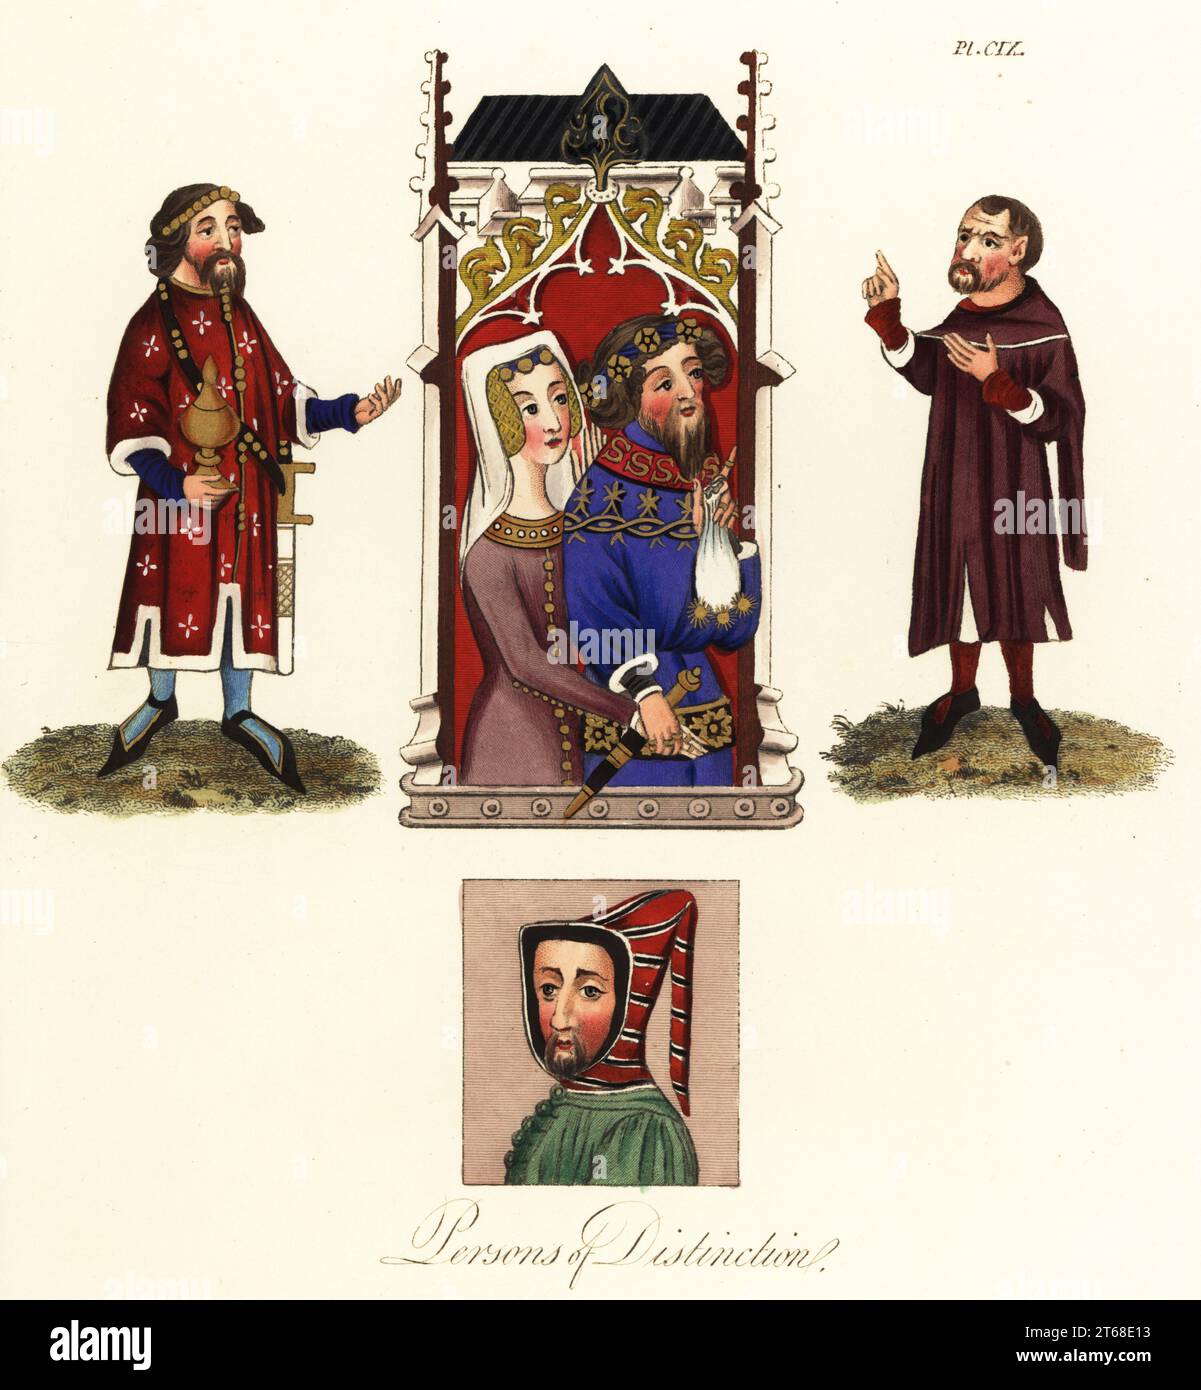 William de Albeneis, Pincerna Regis, with goblet and sword: (f.91v), John Gyniford and his wife Margaret with large bag of gold (f.112v); Alan Strayler, lay illuminator to the abbey (f.108r) and Thomas Bedel of Redbourn. Benefactors and illuminator to the Abbey of St Albans. From the Golden Book of St Albans, Cotton Nero MS D vii. Handcoloured engraving by Joseph Strutt from his Complete View of the Dress and Habits of the People of England, Henry Bohn, London, 1842. Stock Photo